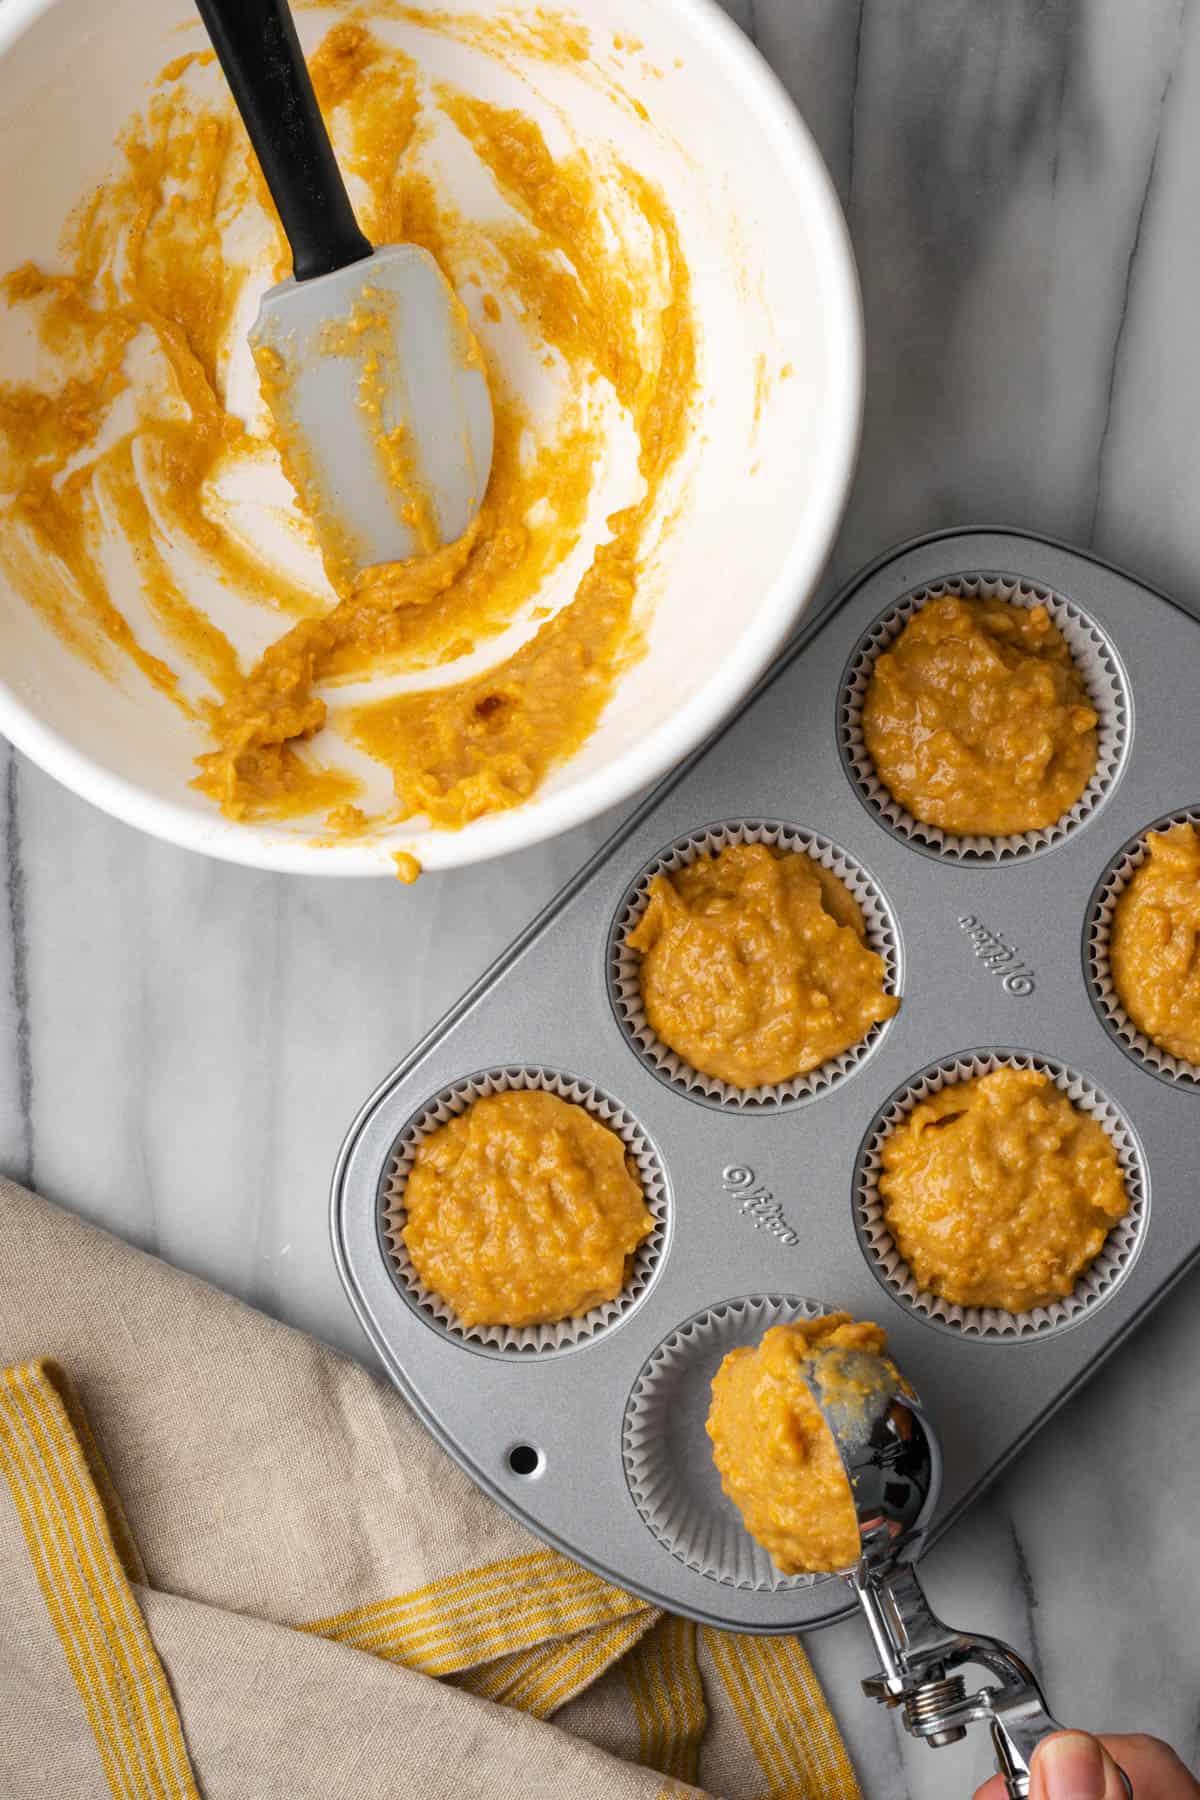 Sweet potato muffin batter being scopped into a metal muffin tin.